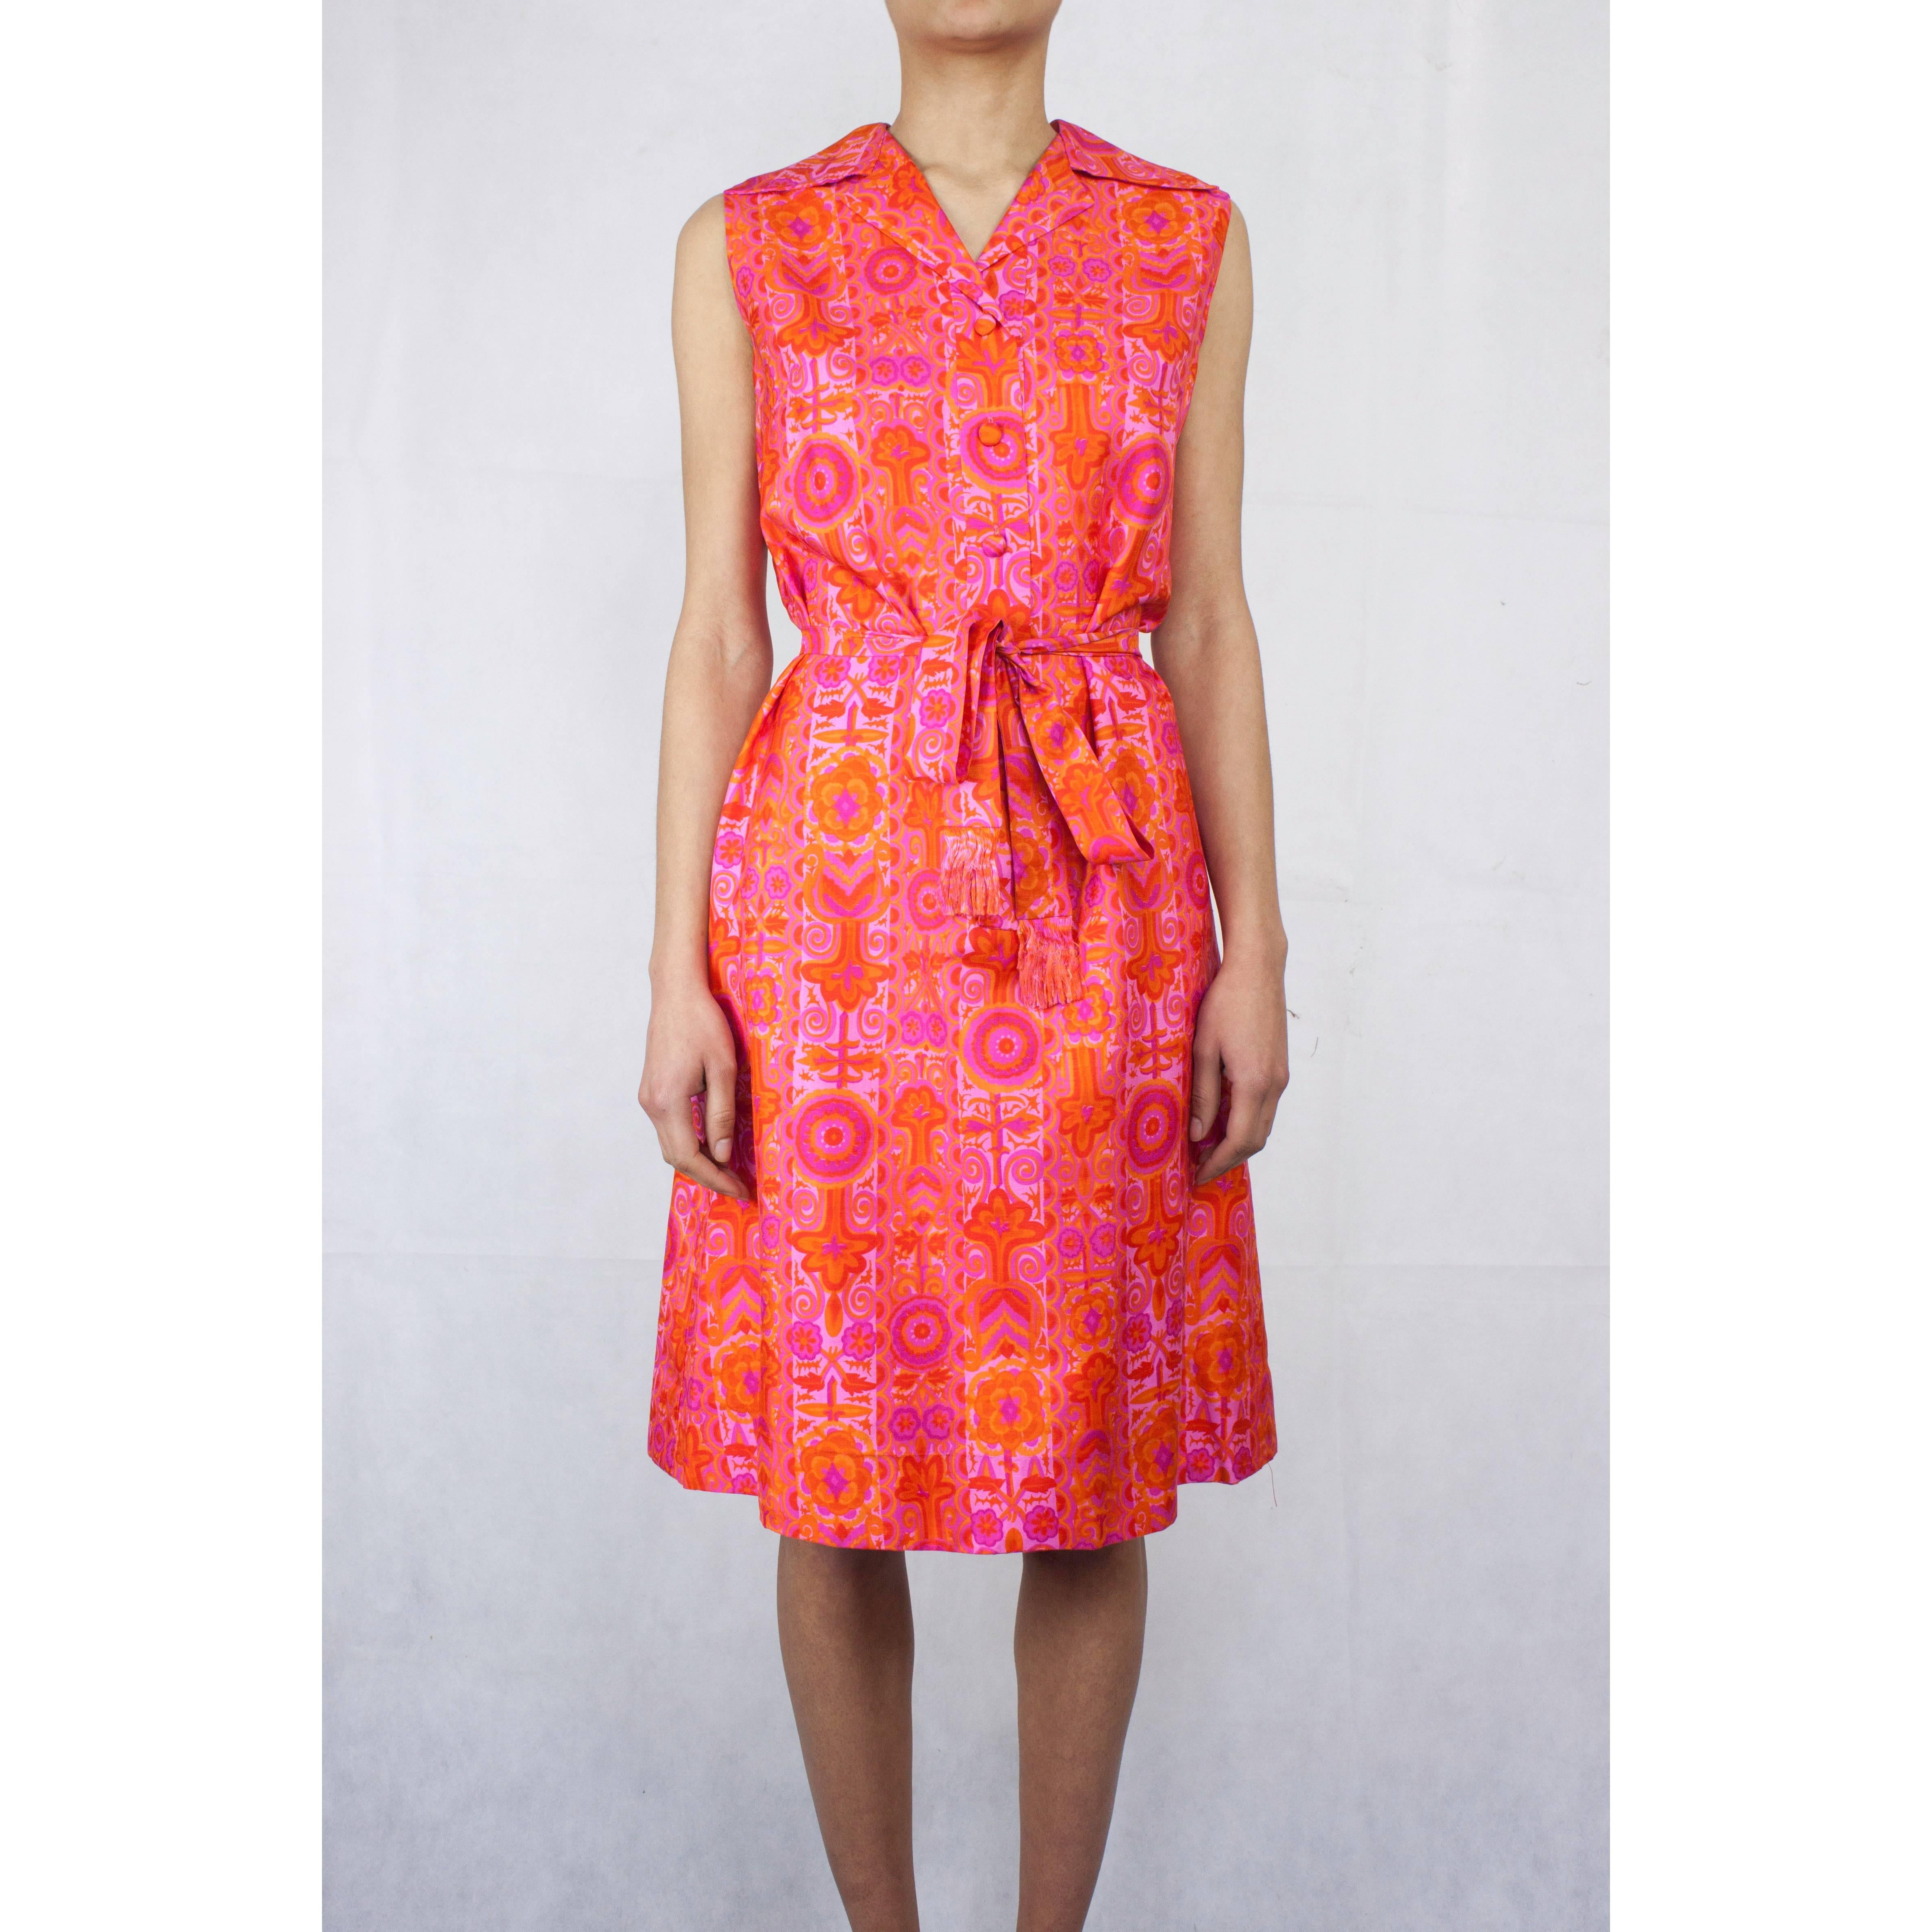 
This couture finished dress is constructed from a luxurious silk material from the Lyon silk weaver Bianchini-Férier. Featuring a fuchsia, orange and saffron floral motif, small notched collar and single-breasted with silk covered buttons at the